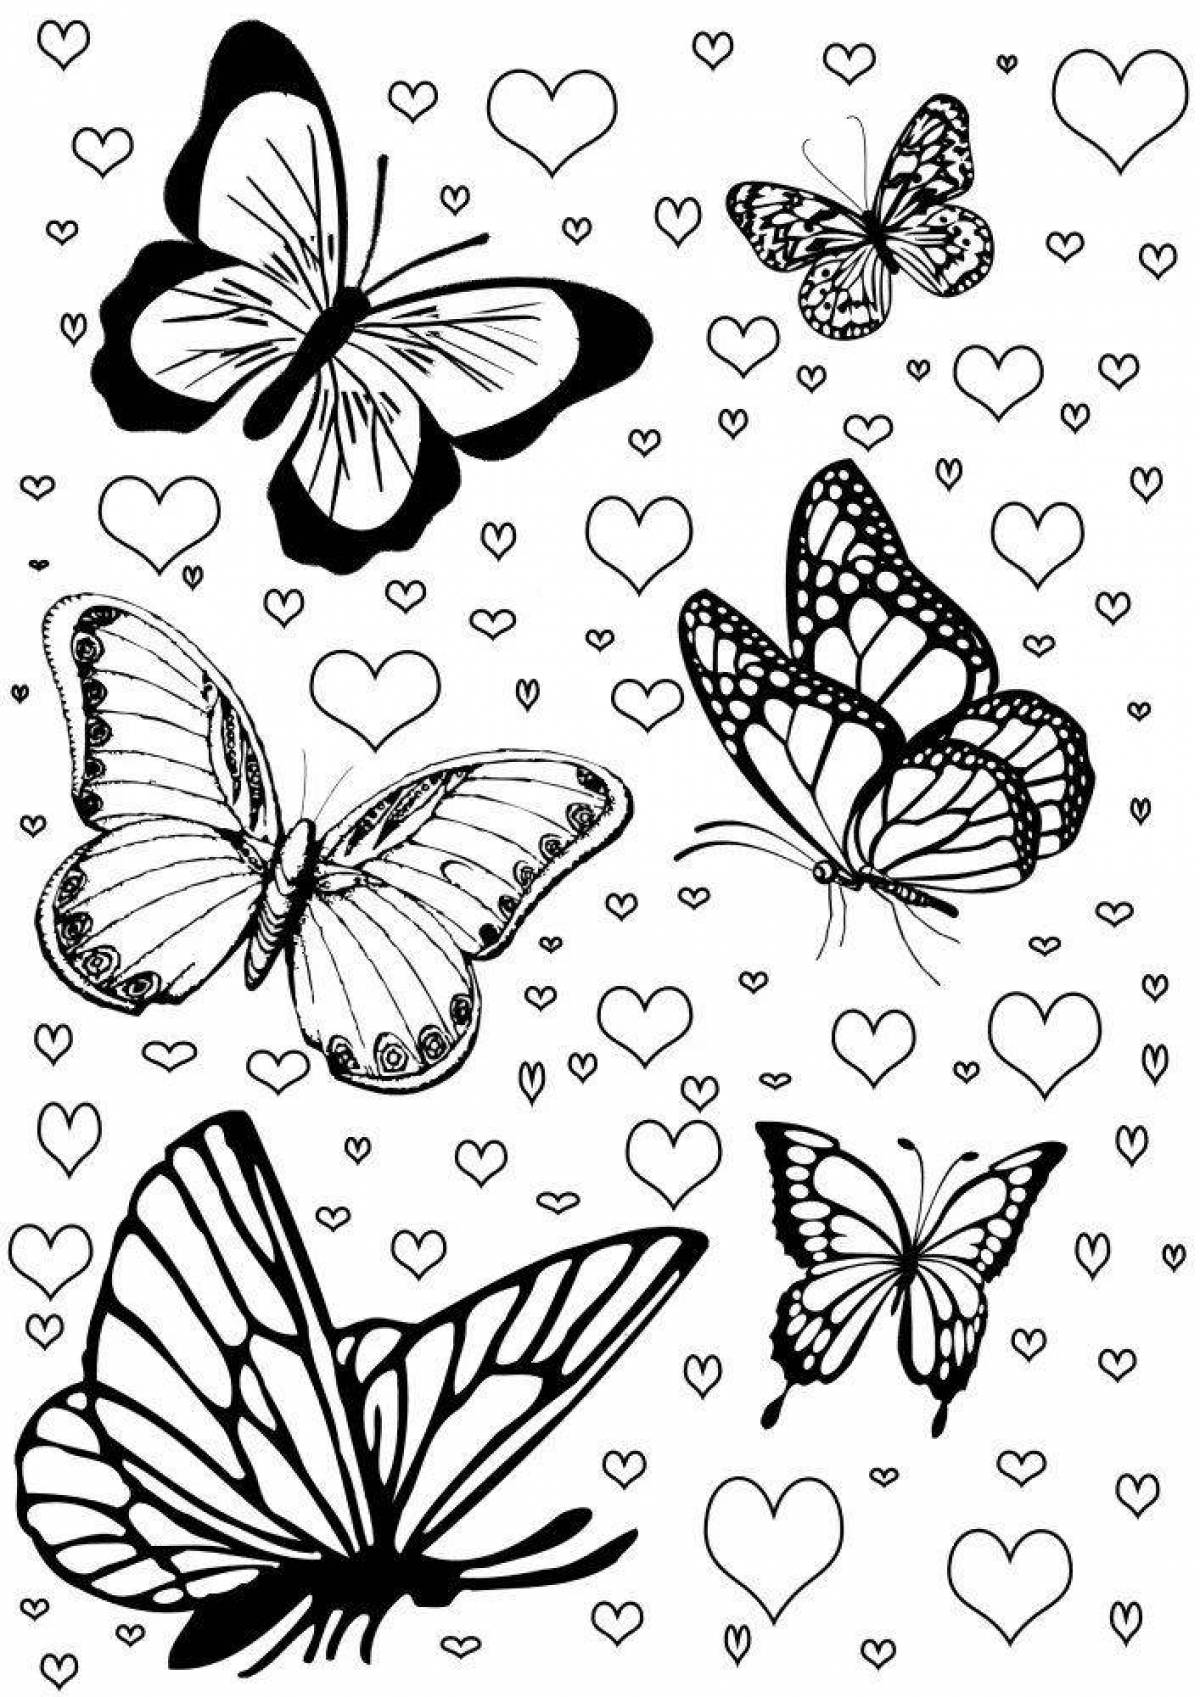 Wonderful butterfly coloring pages